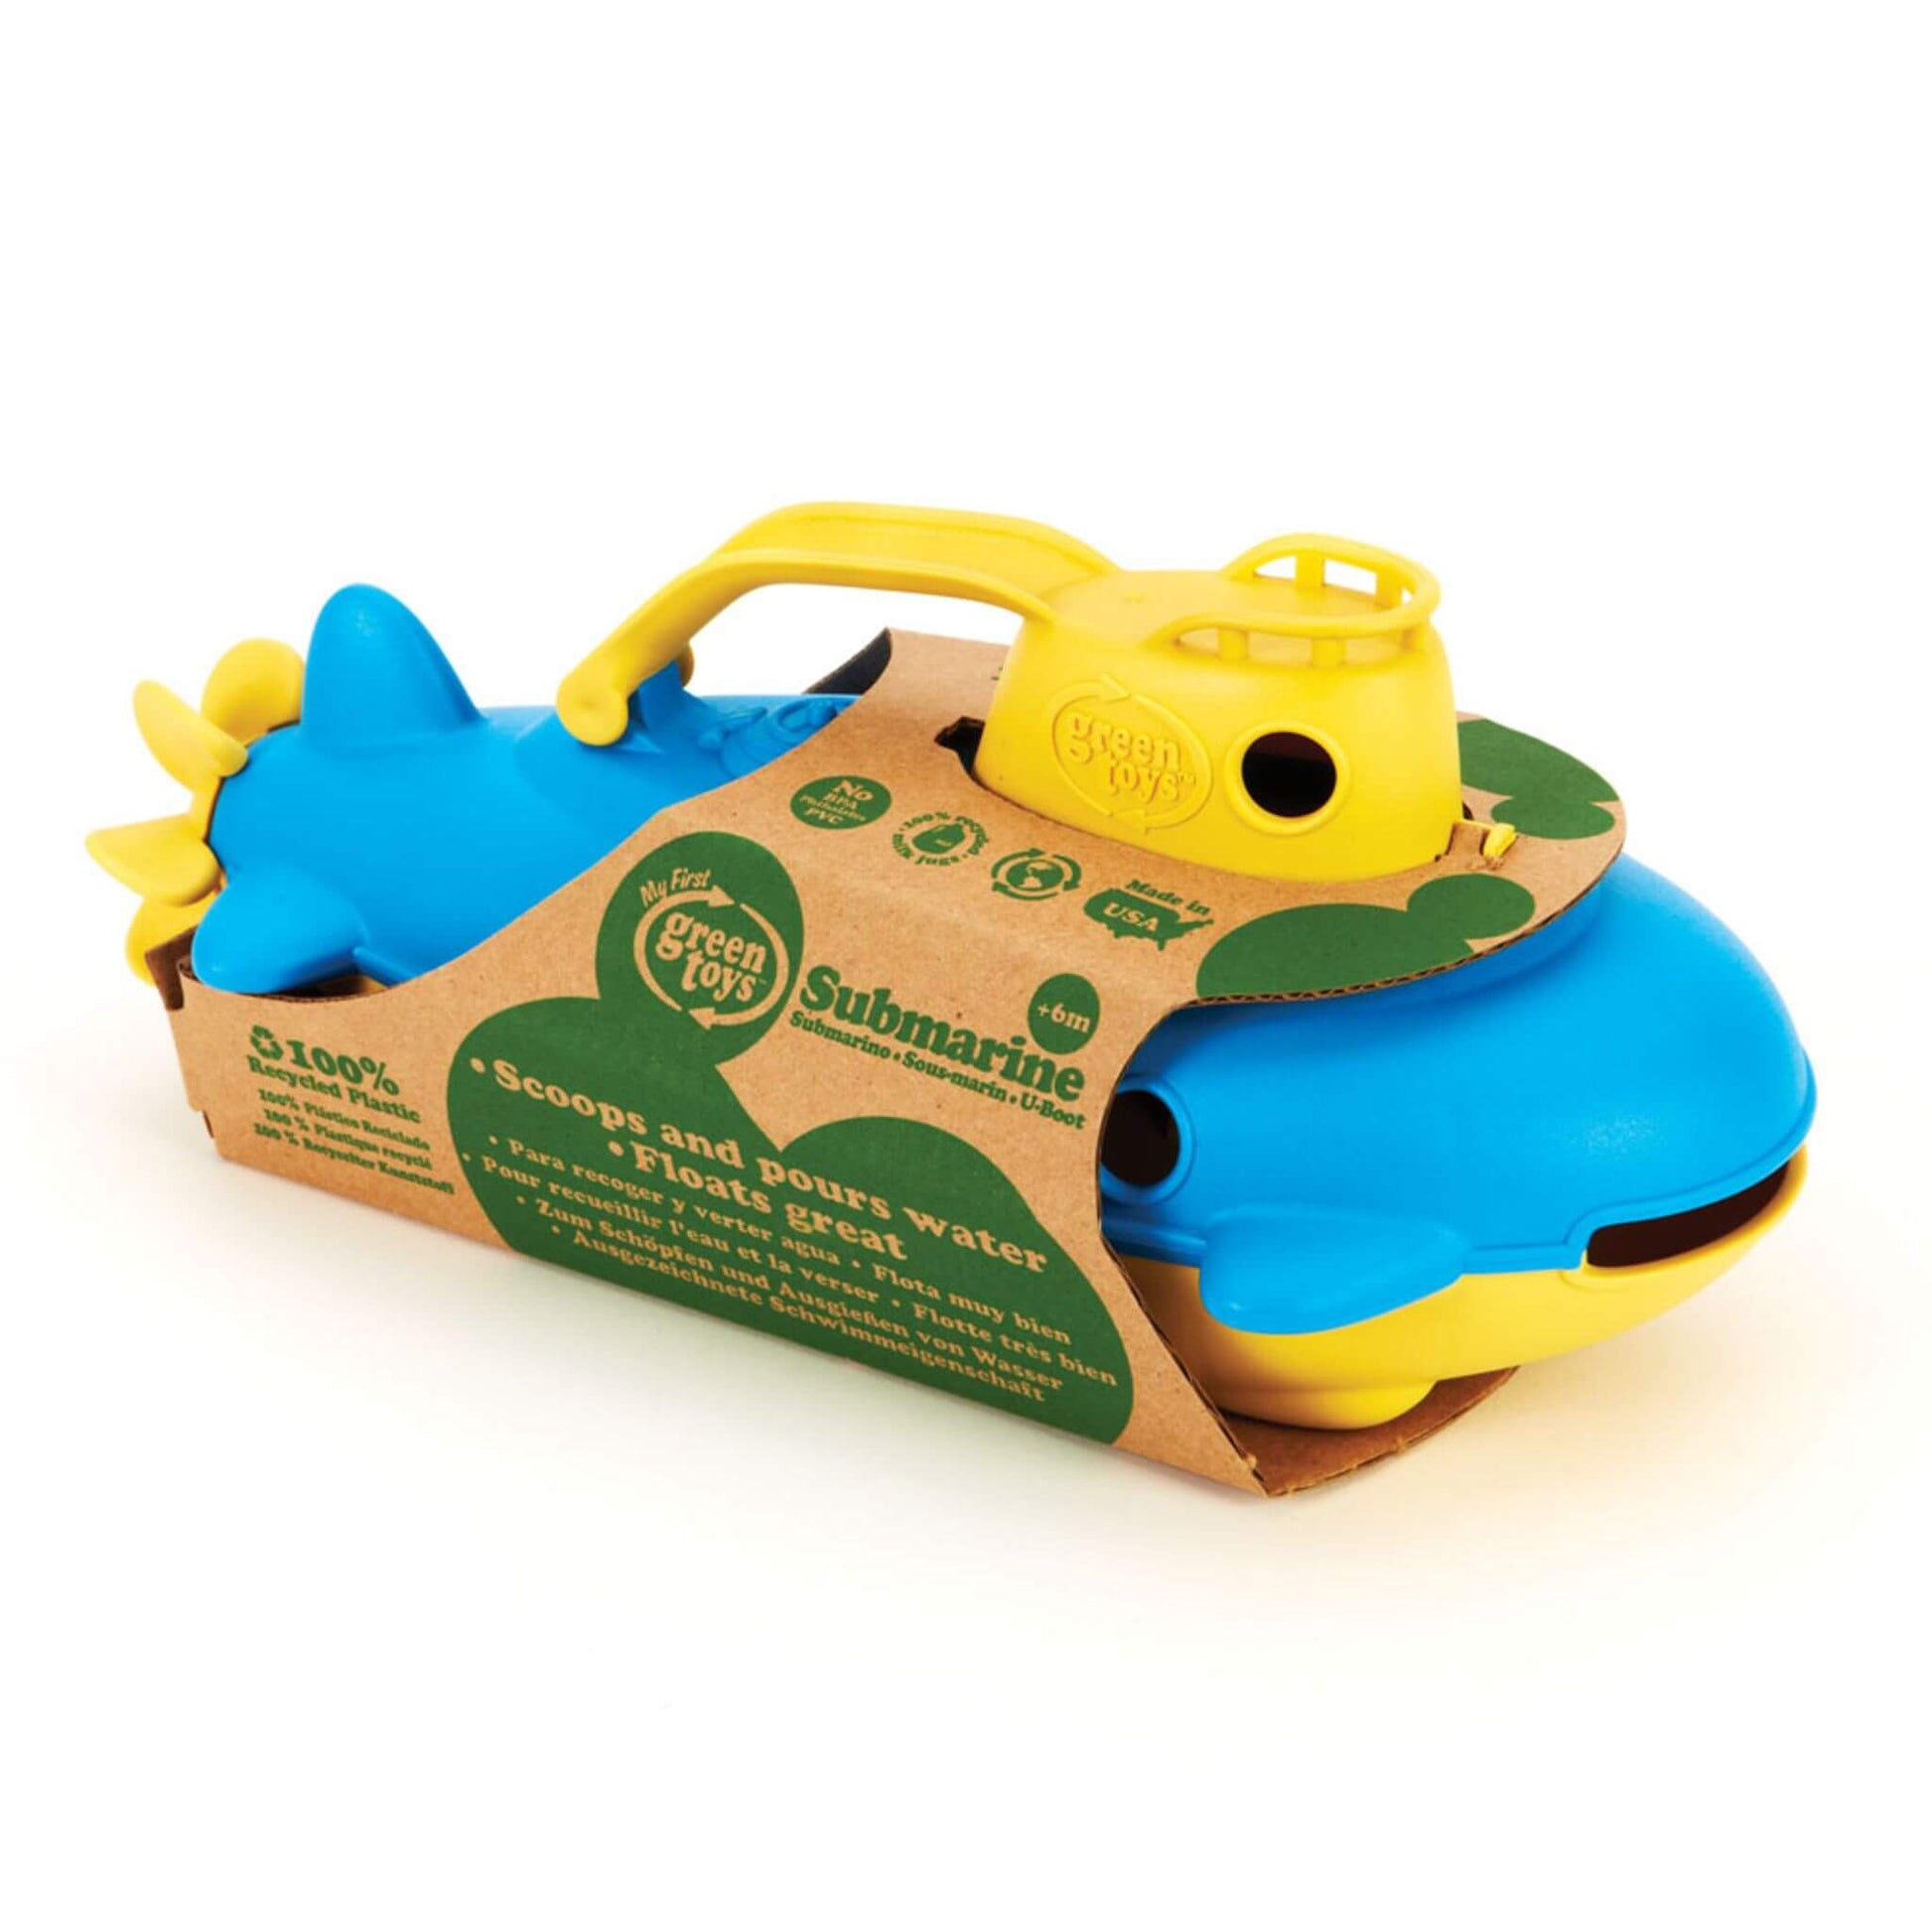 Green Toys Submarine - recycled plastic eco-friendly toy in eco packaging